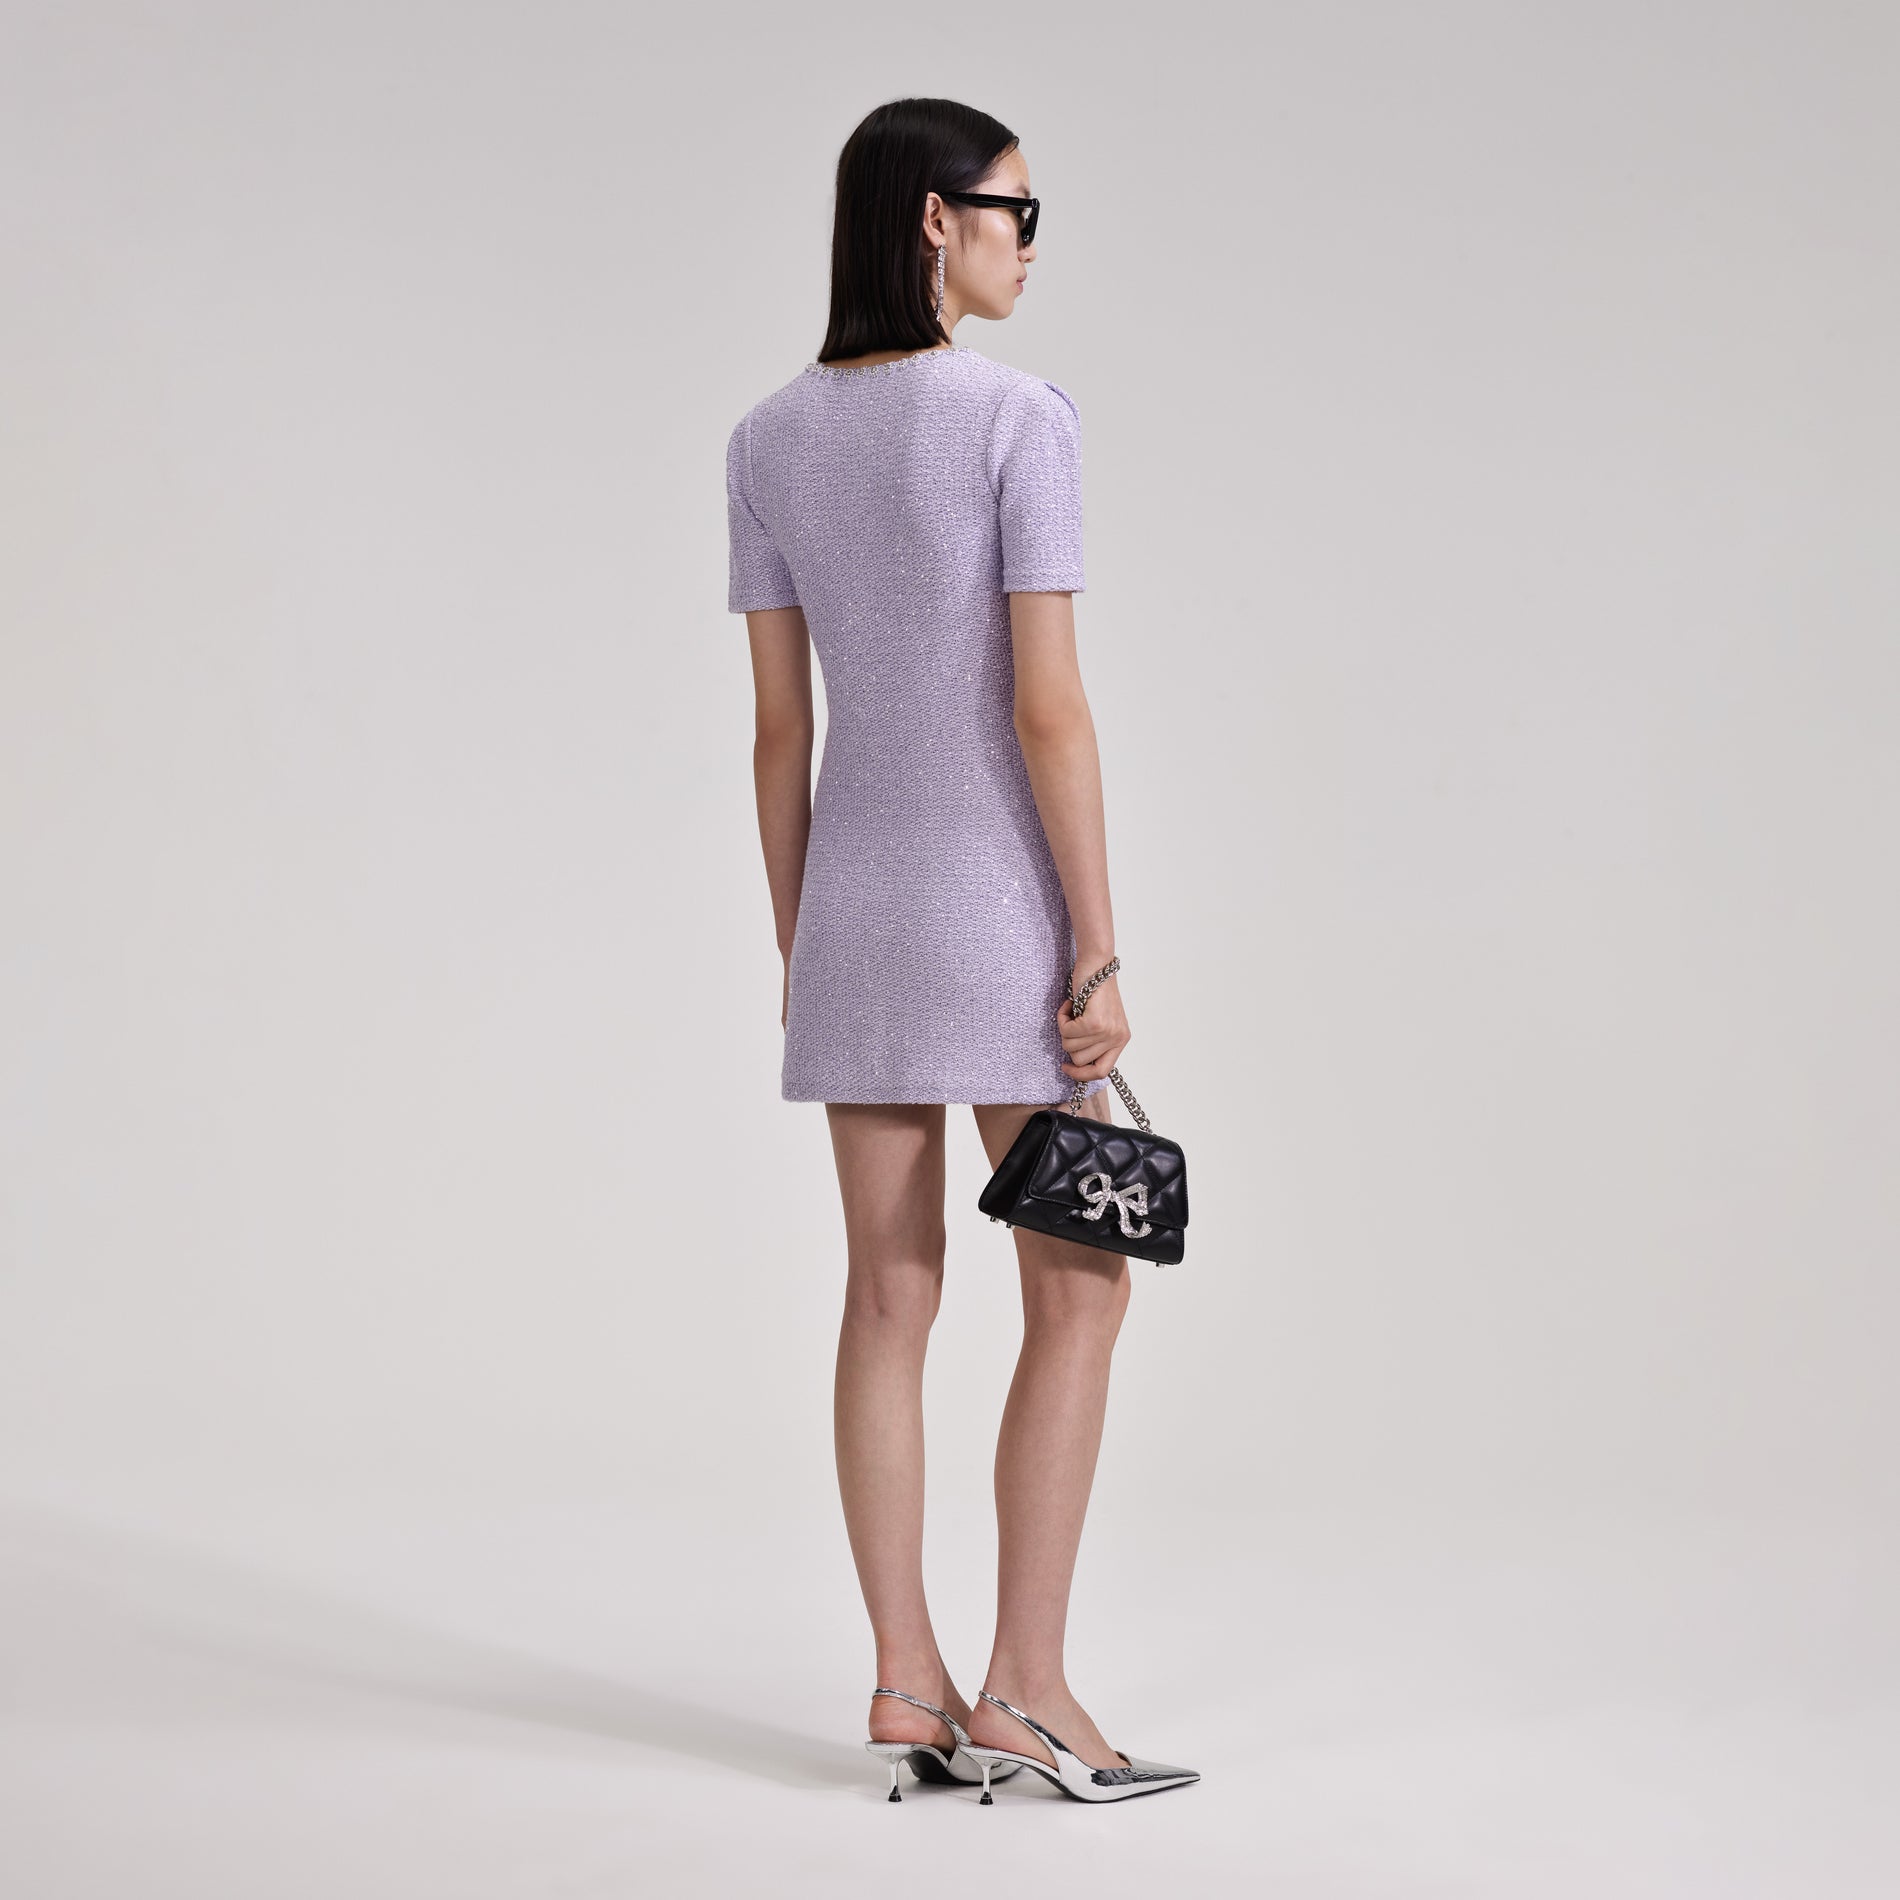 A woman wearing the Lilac Sequin Knit Mini Dress